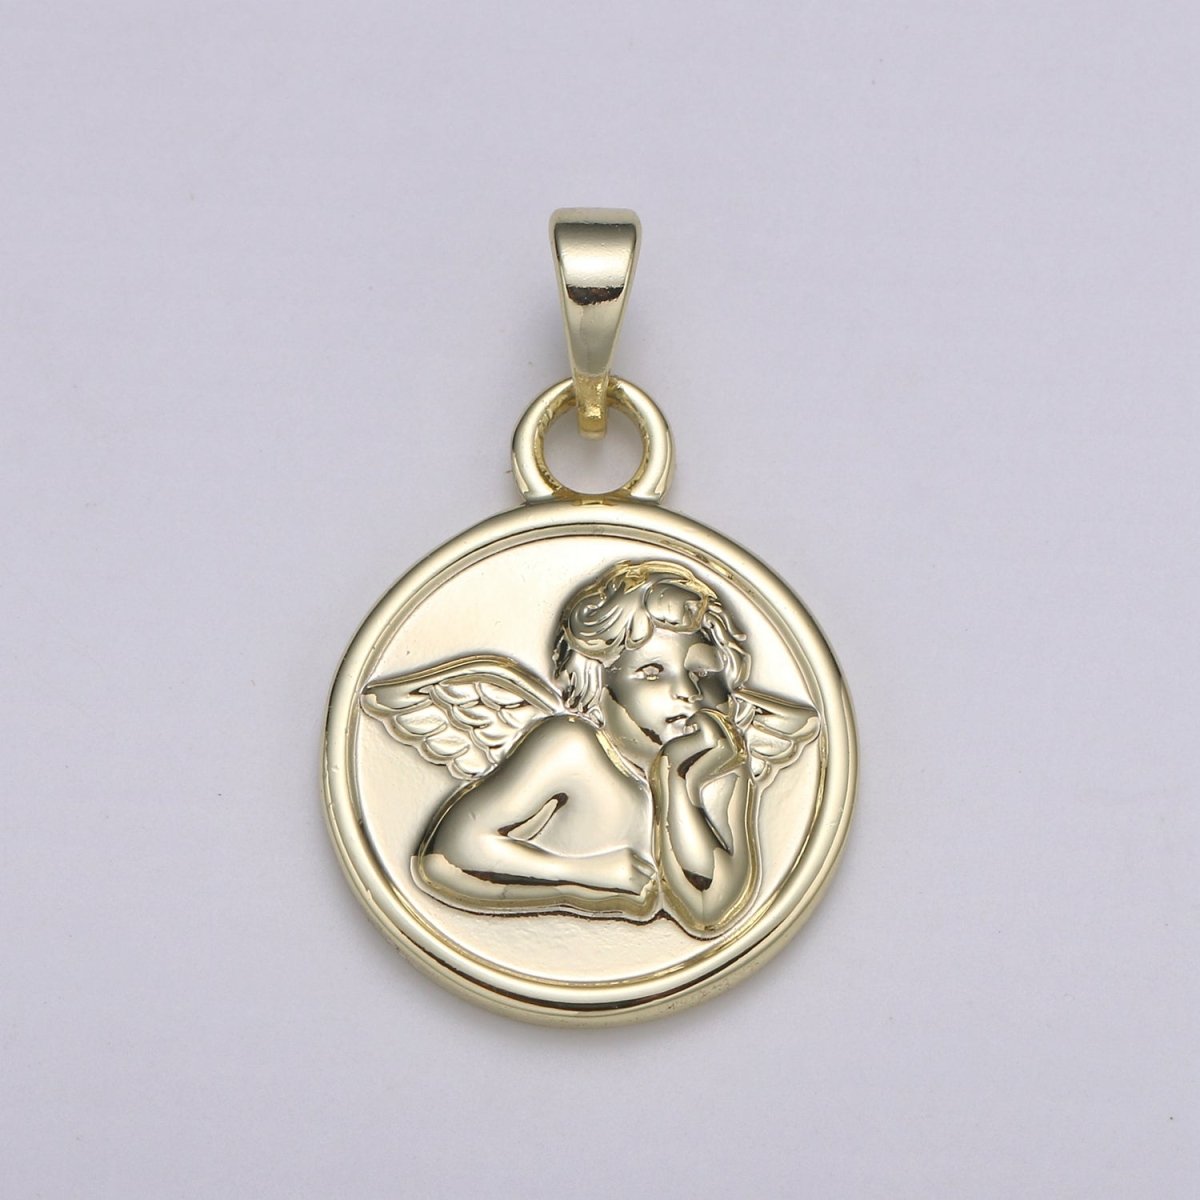 Detailed Cherub Angel Coin Medallion 15mm Disc Charm 14k Gold Filled Charm Religious Angelic Spiritual Charm Wing Pendant Love Jewelry H-232 - DLUXCA